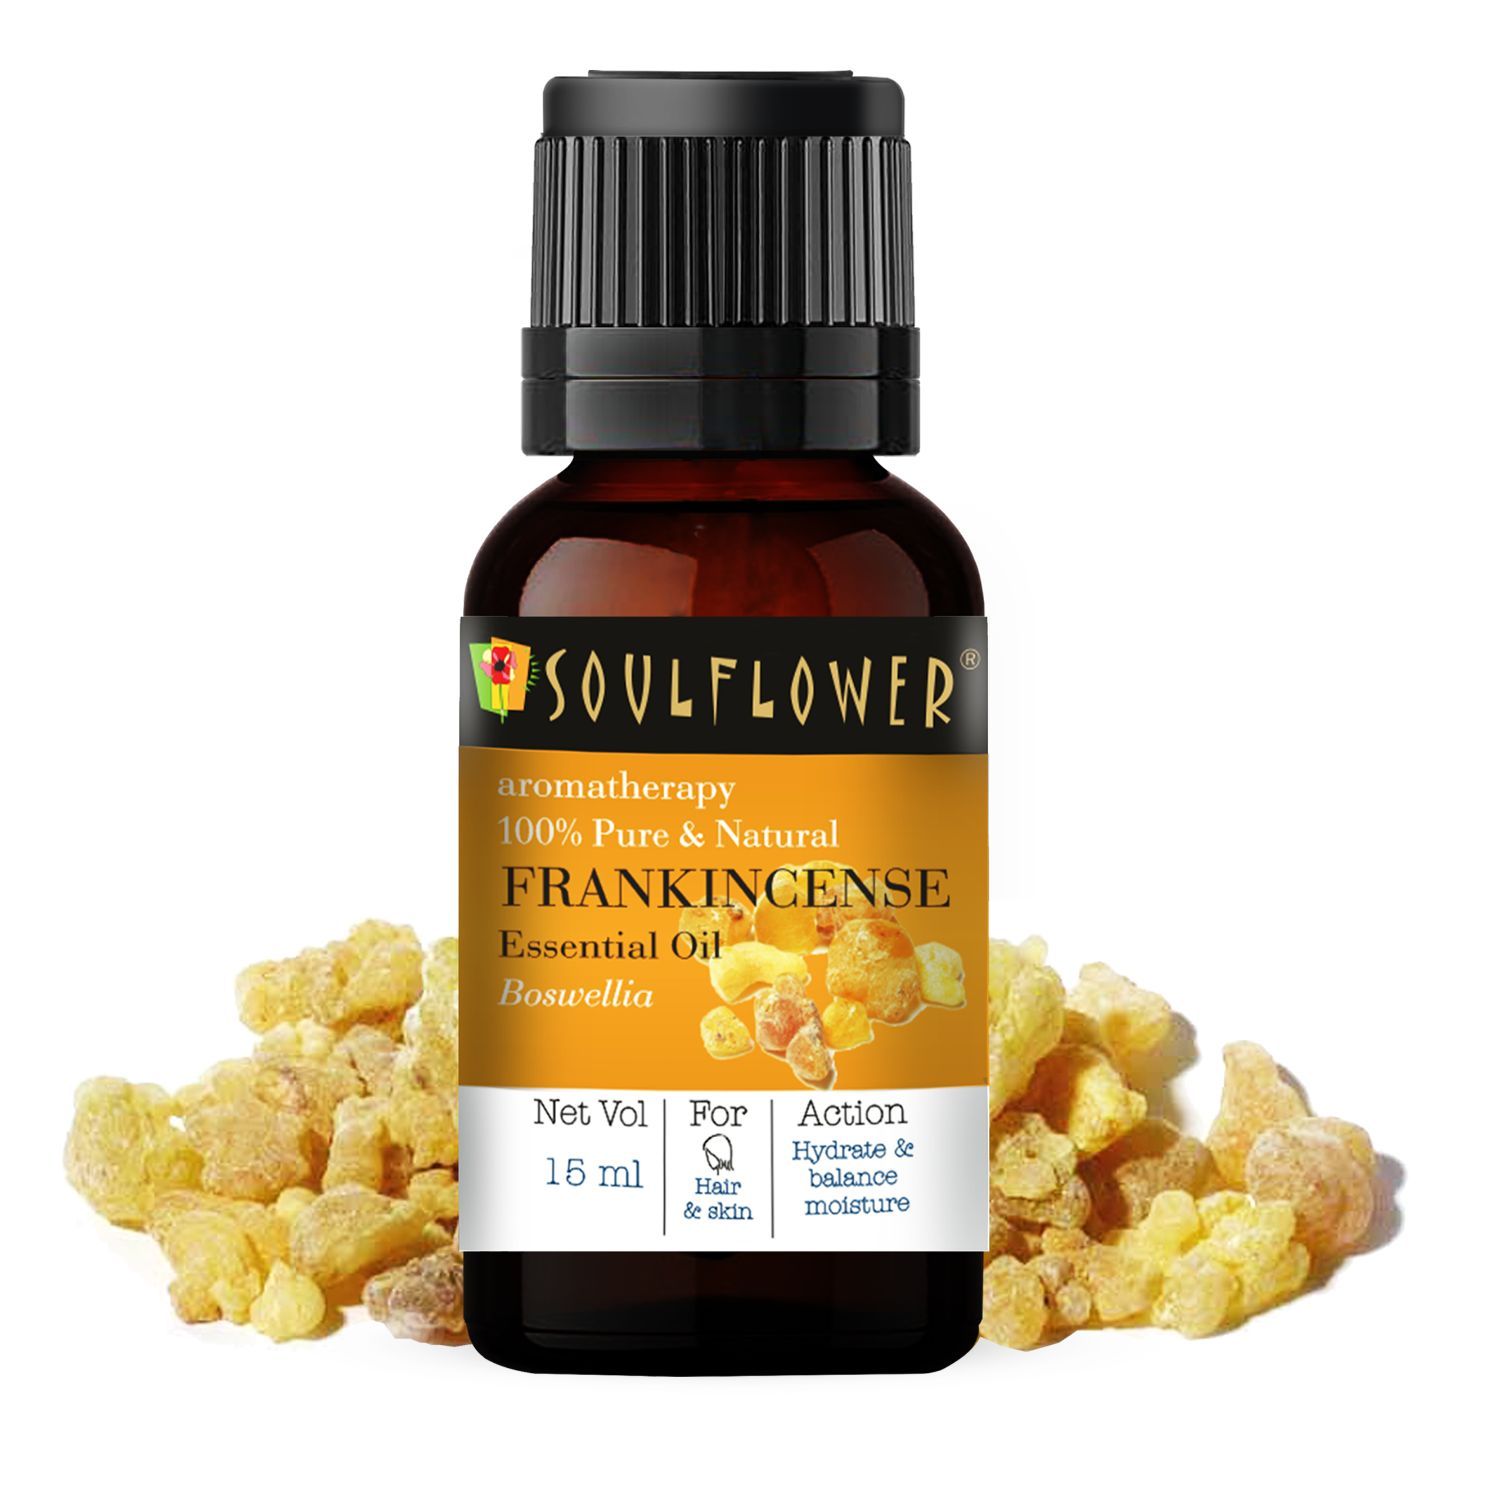 Soulflower Frankincense Essential Oil for Healthy Hair, Face, Skin Wrinkles, Scalp, Control Acne